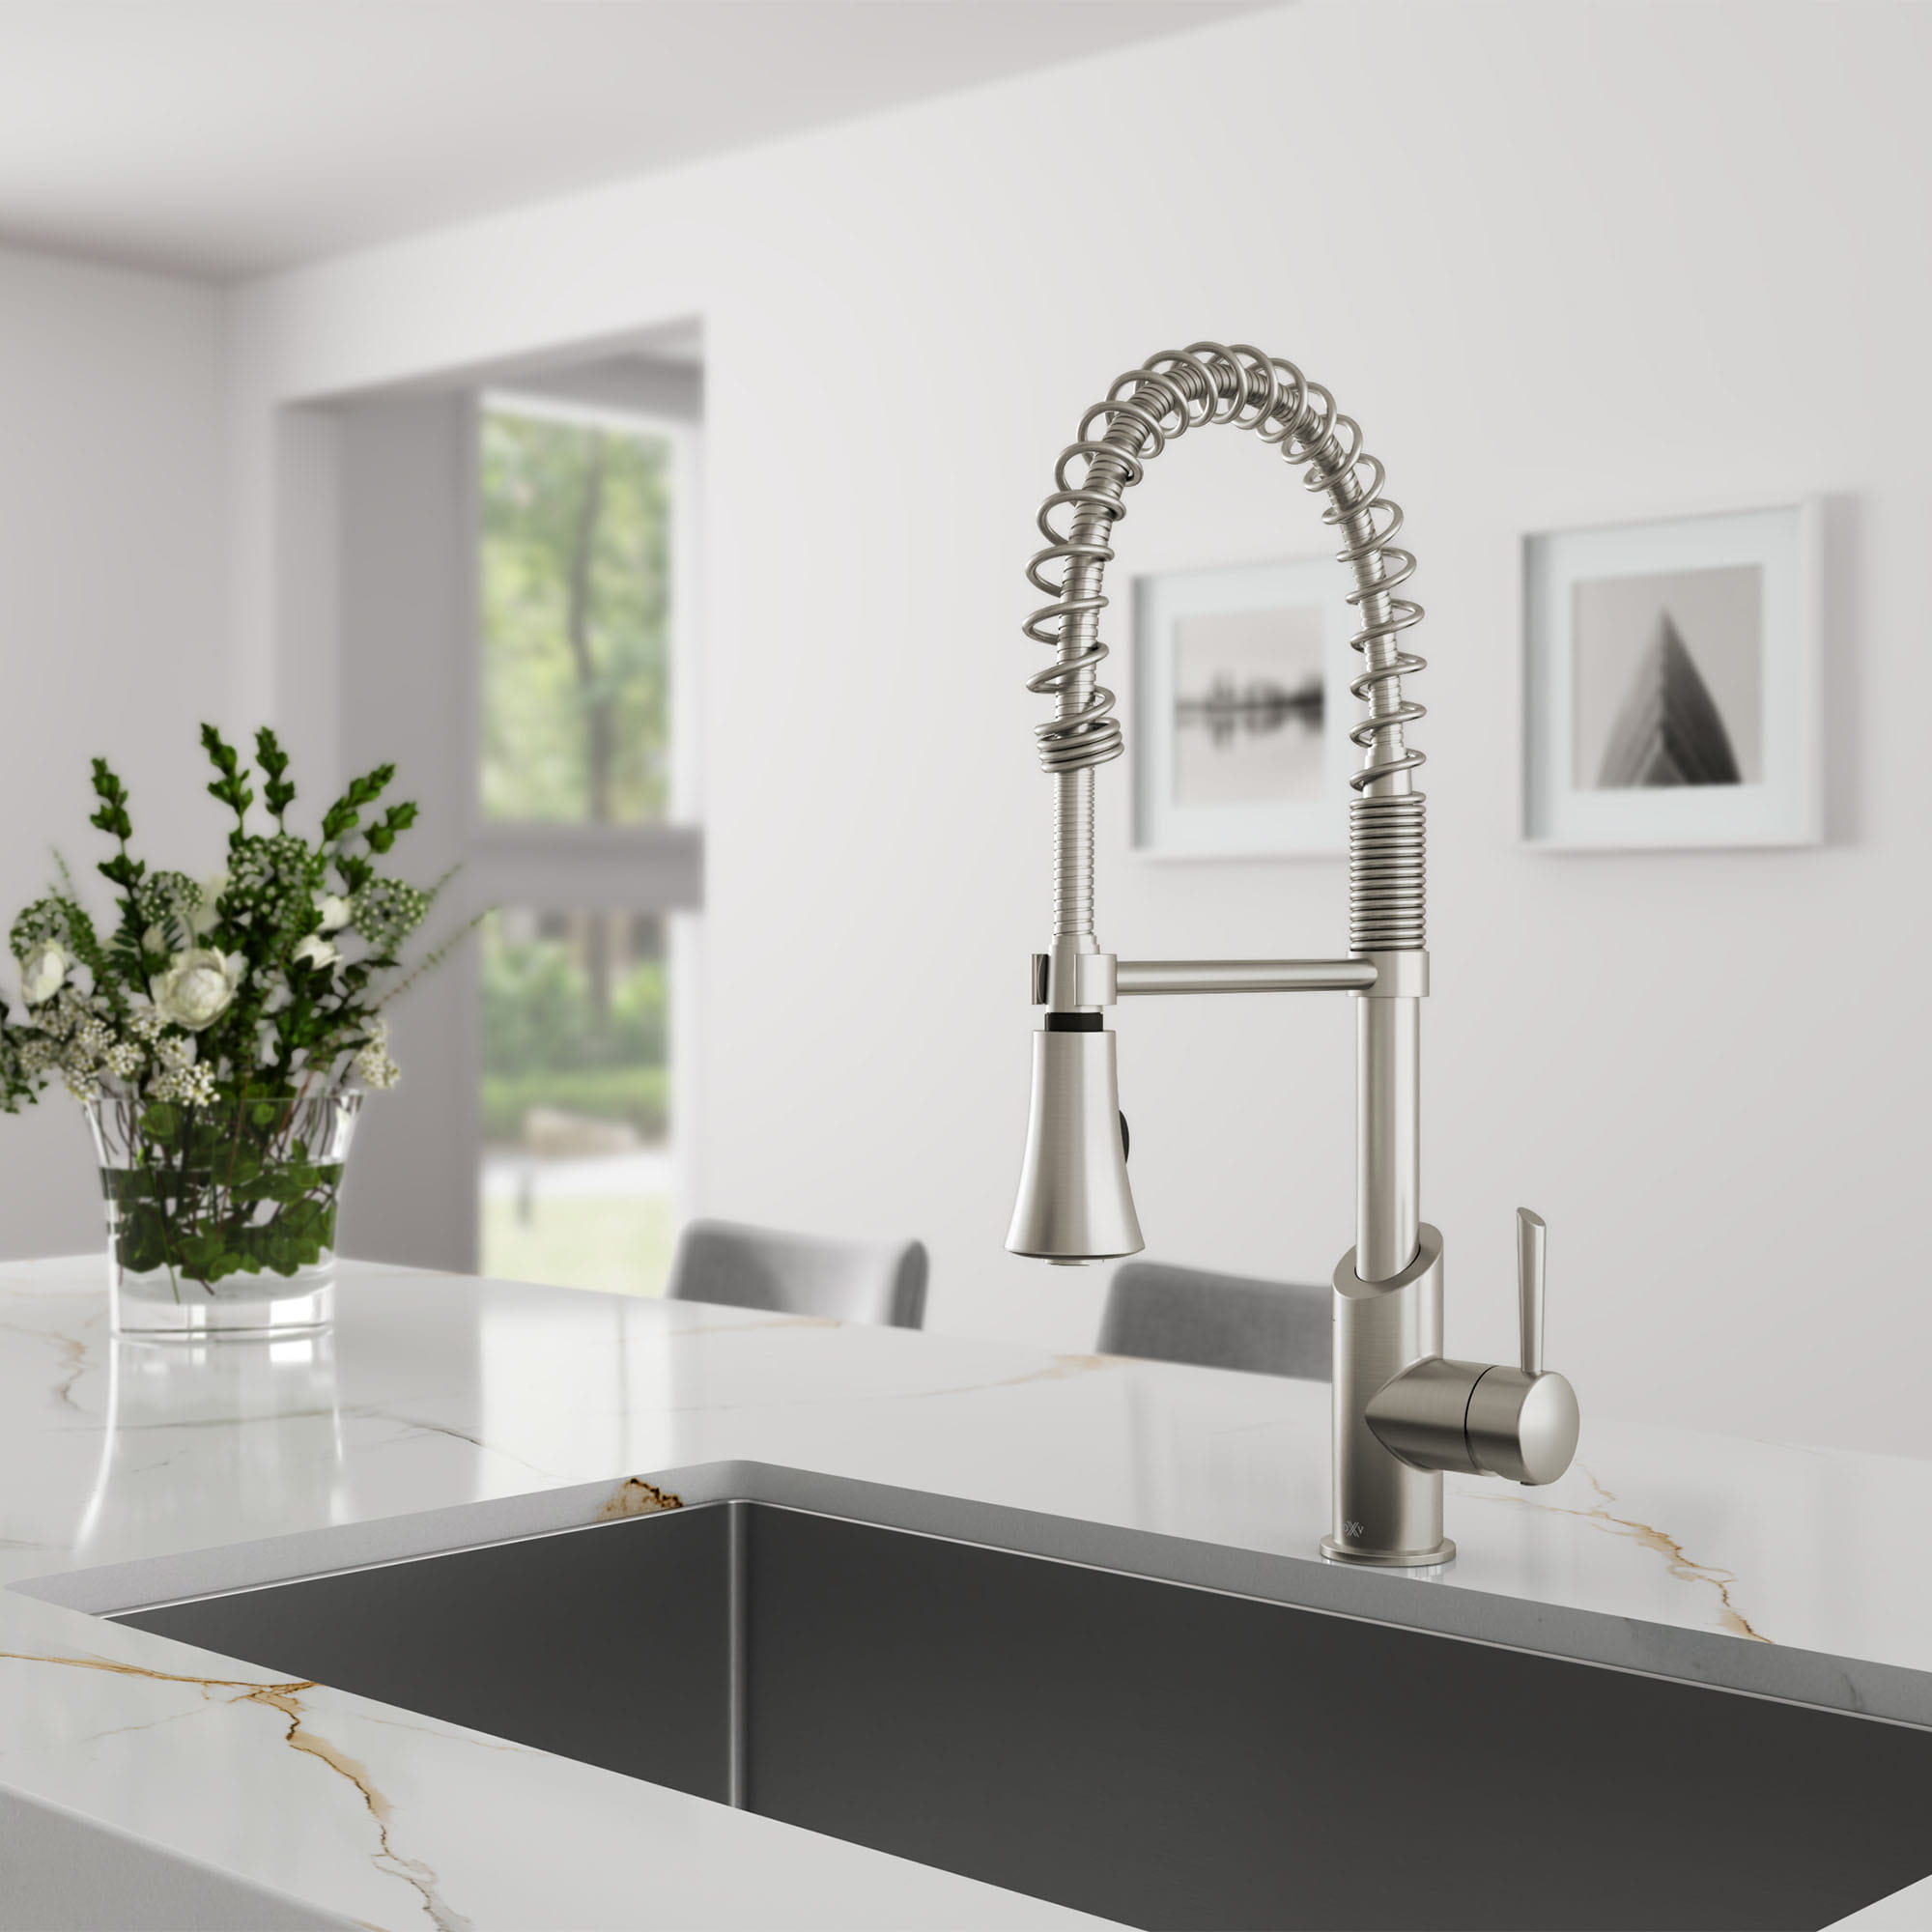 Fresno Kitchen Faucet Collection from DXV